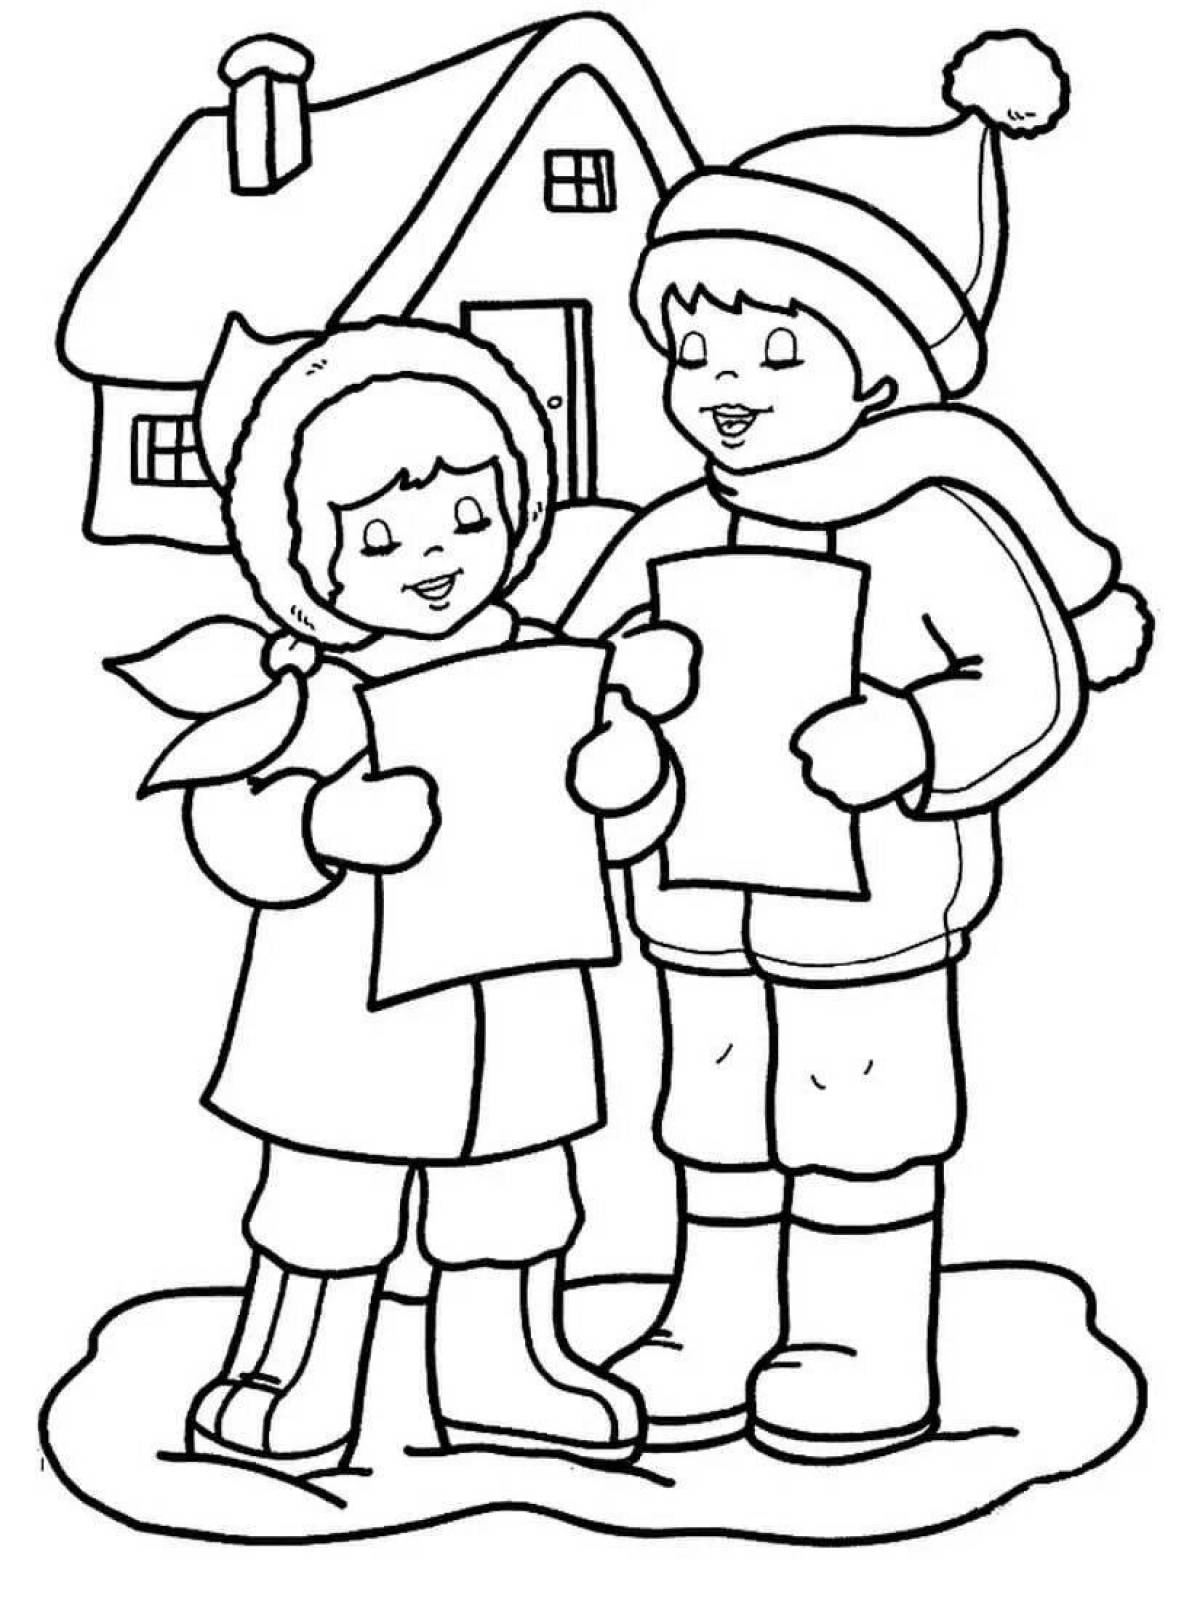 Great carols coloring pages for kids